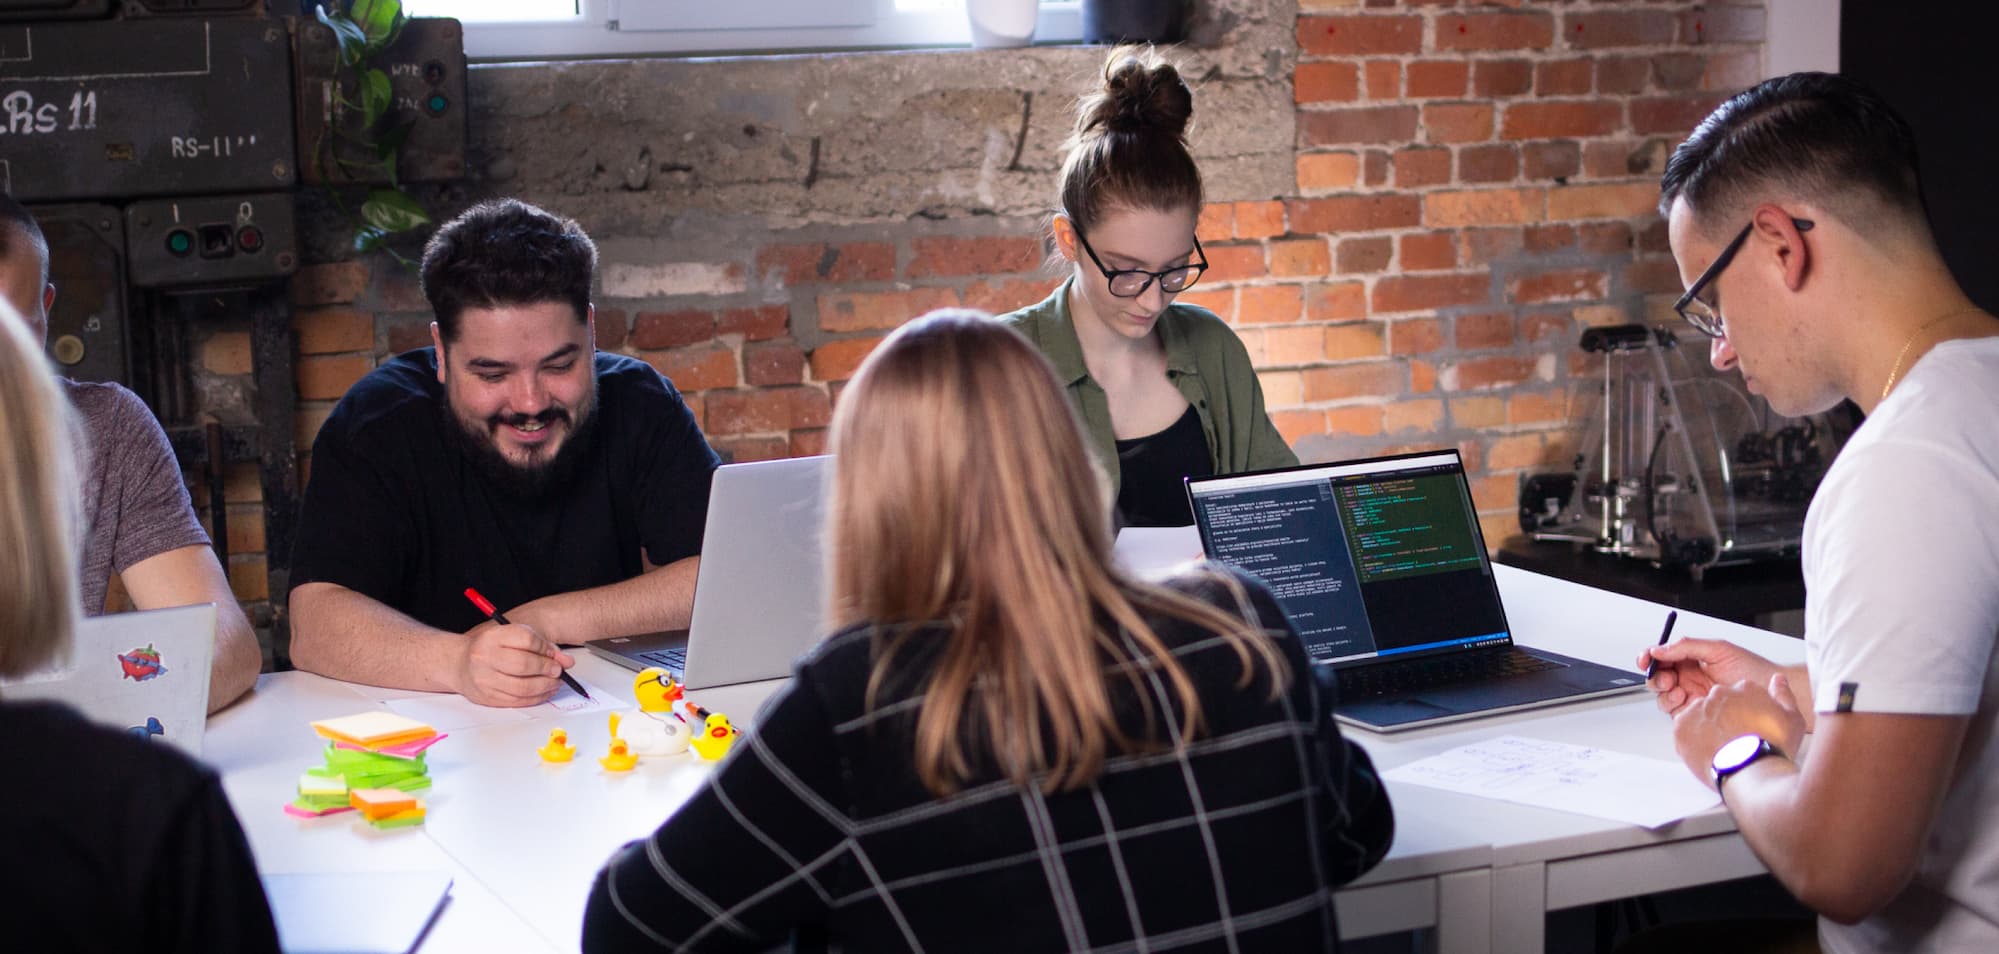 A group of people sitting at a long table with laptops and some rubber ducks on it, writing on A4 sheets of paper during a project planning meeting at an office with red brick wall